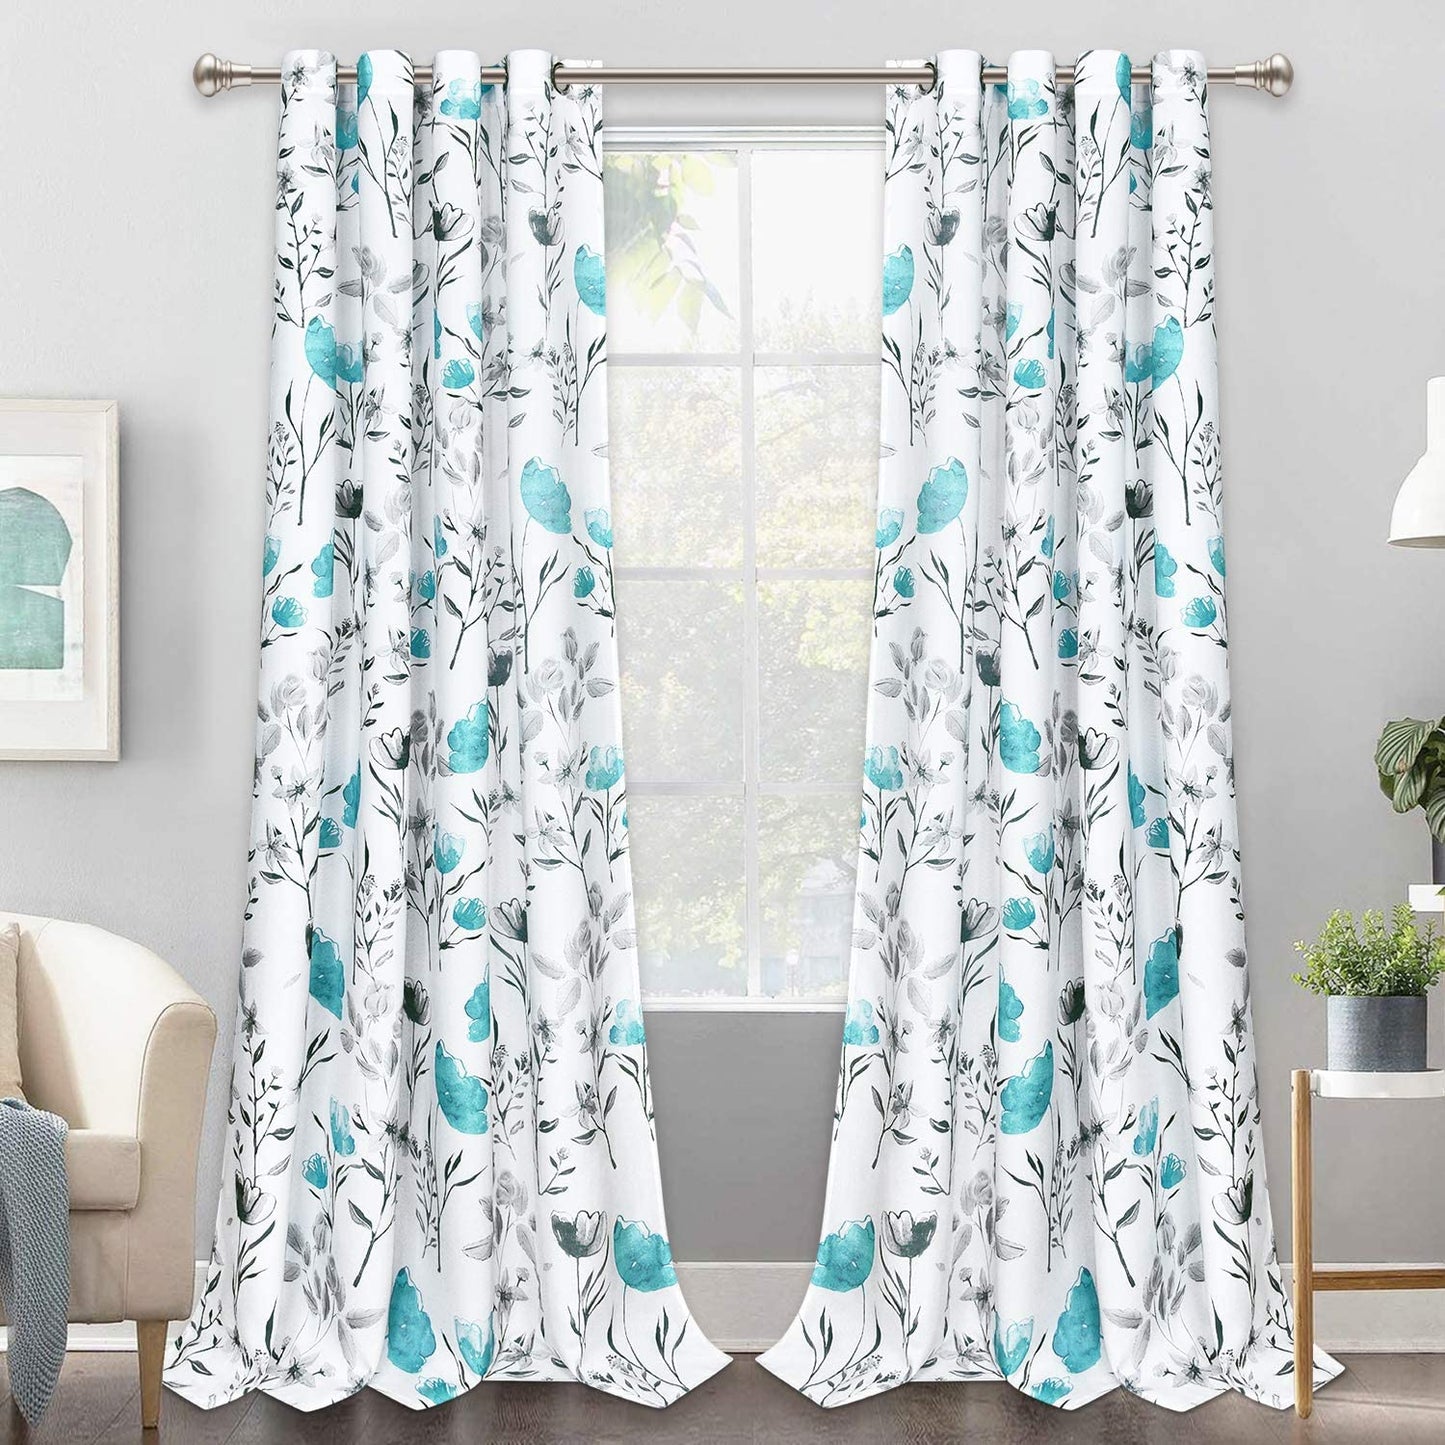 Likiyol Floral Kithchen Curtains 36 Inch Watercolor Flower Leaves Tier Curtains, Yellow and Gray Floral Cafe Curtains, Rod Pocket Small Window Curtain for Cafe Bathroom Bedroom Drapes  Likiyol Teal 96"L X 52"W 